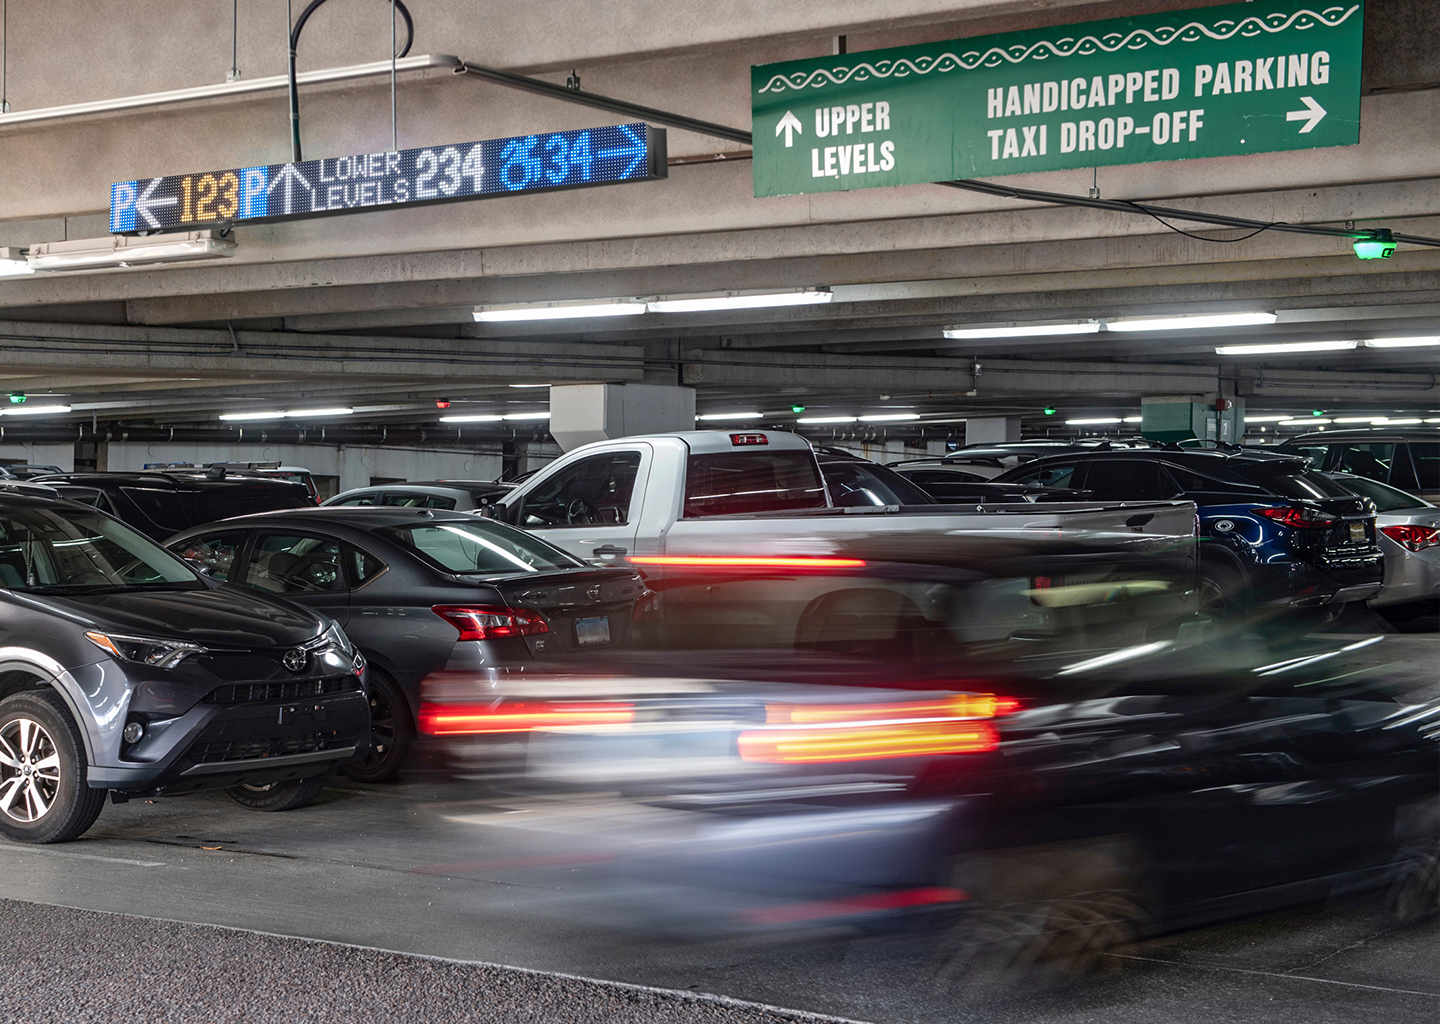 Provide your customers with real-time parking space availability information for your parking garage using VMS digital wayfinding signage